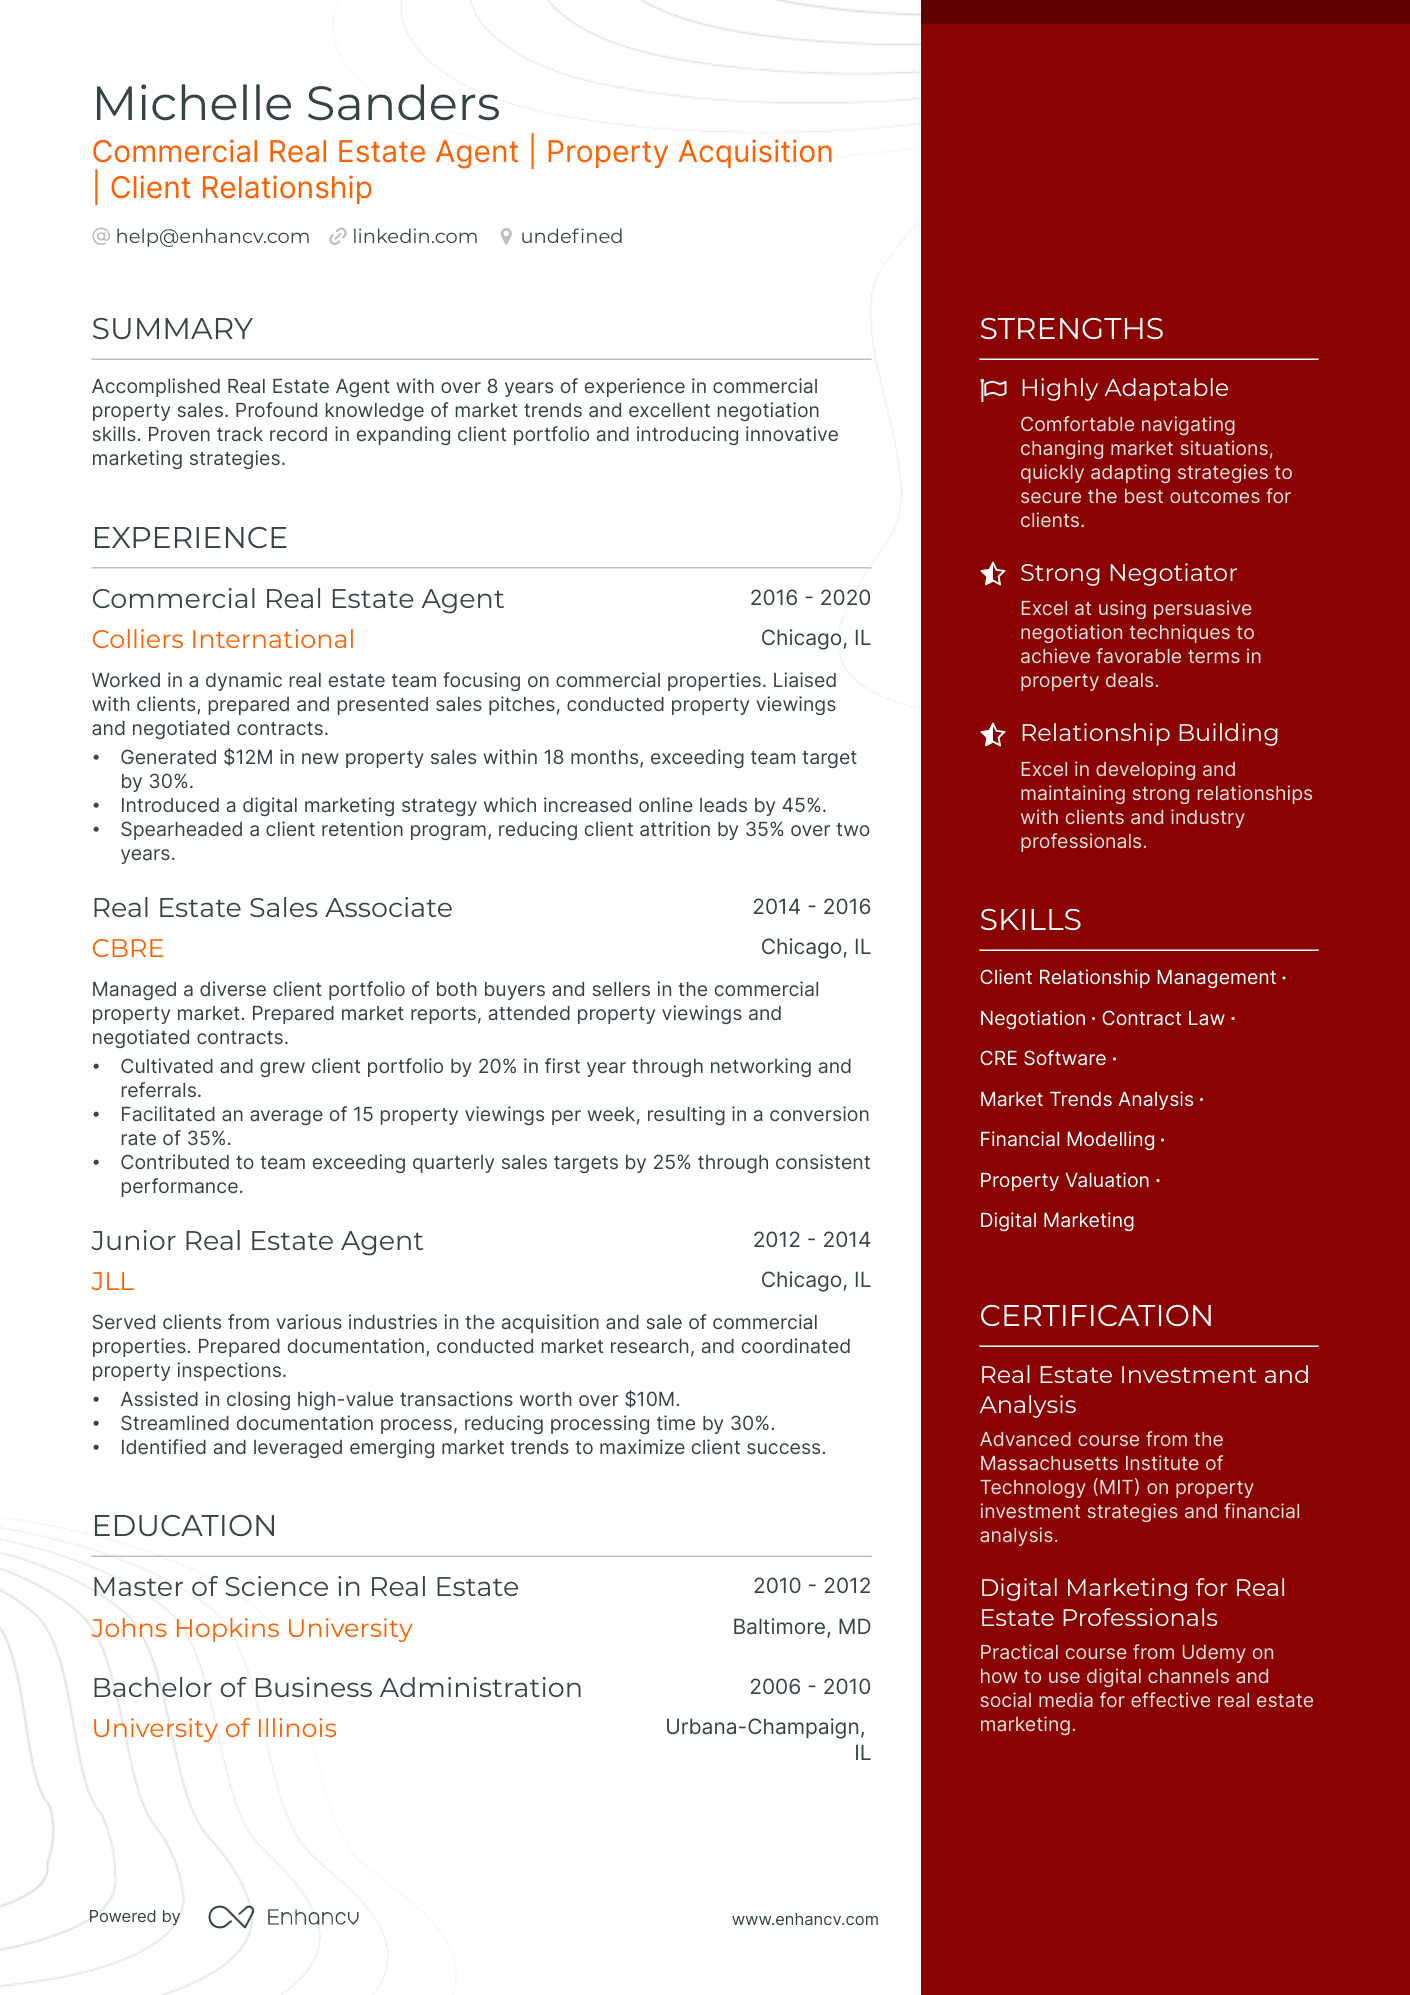 Commercial Real Estate Agent resume example